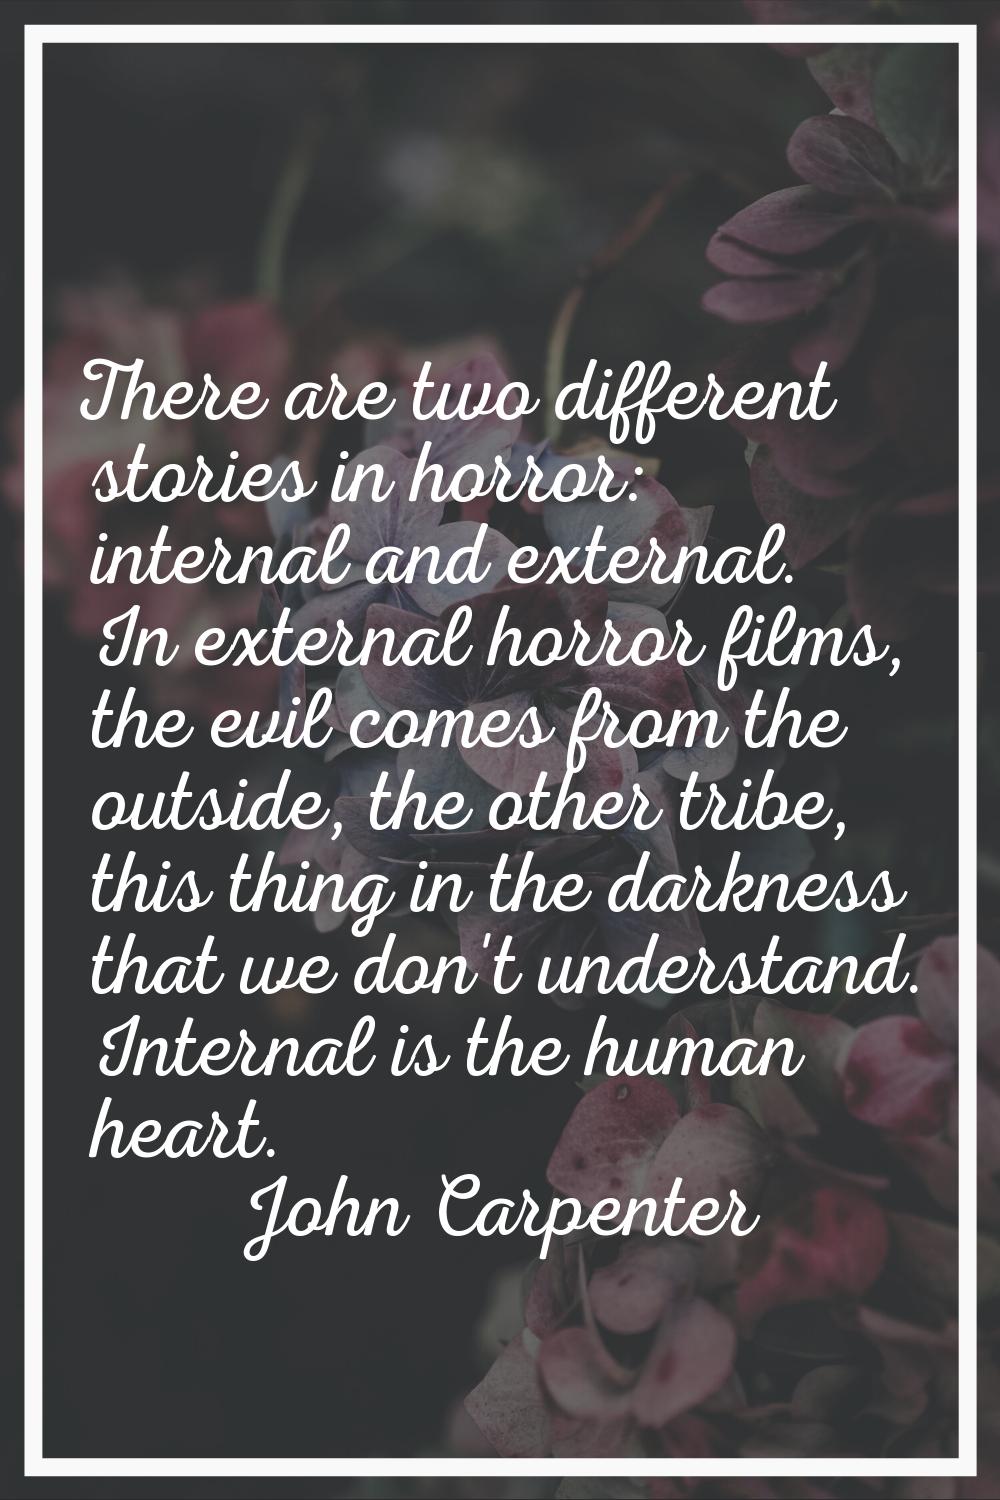 There are two different stories in horror: internal and external. In external horror films, the evi